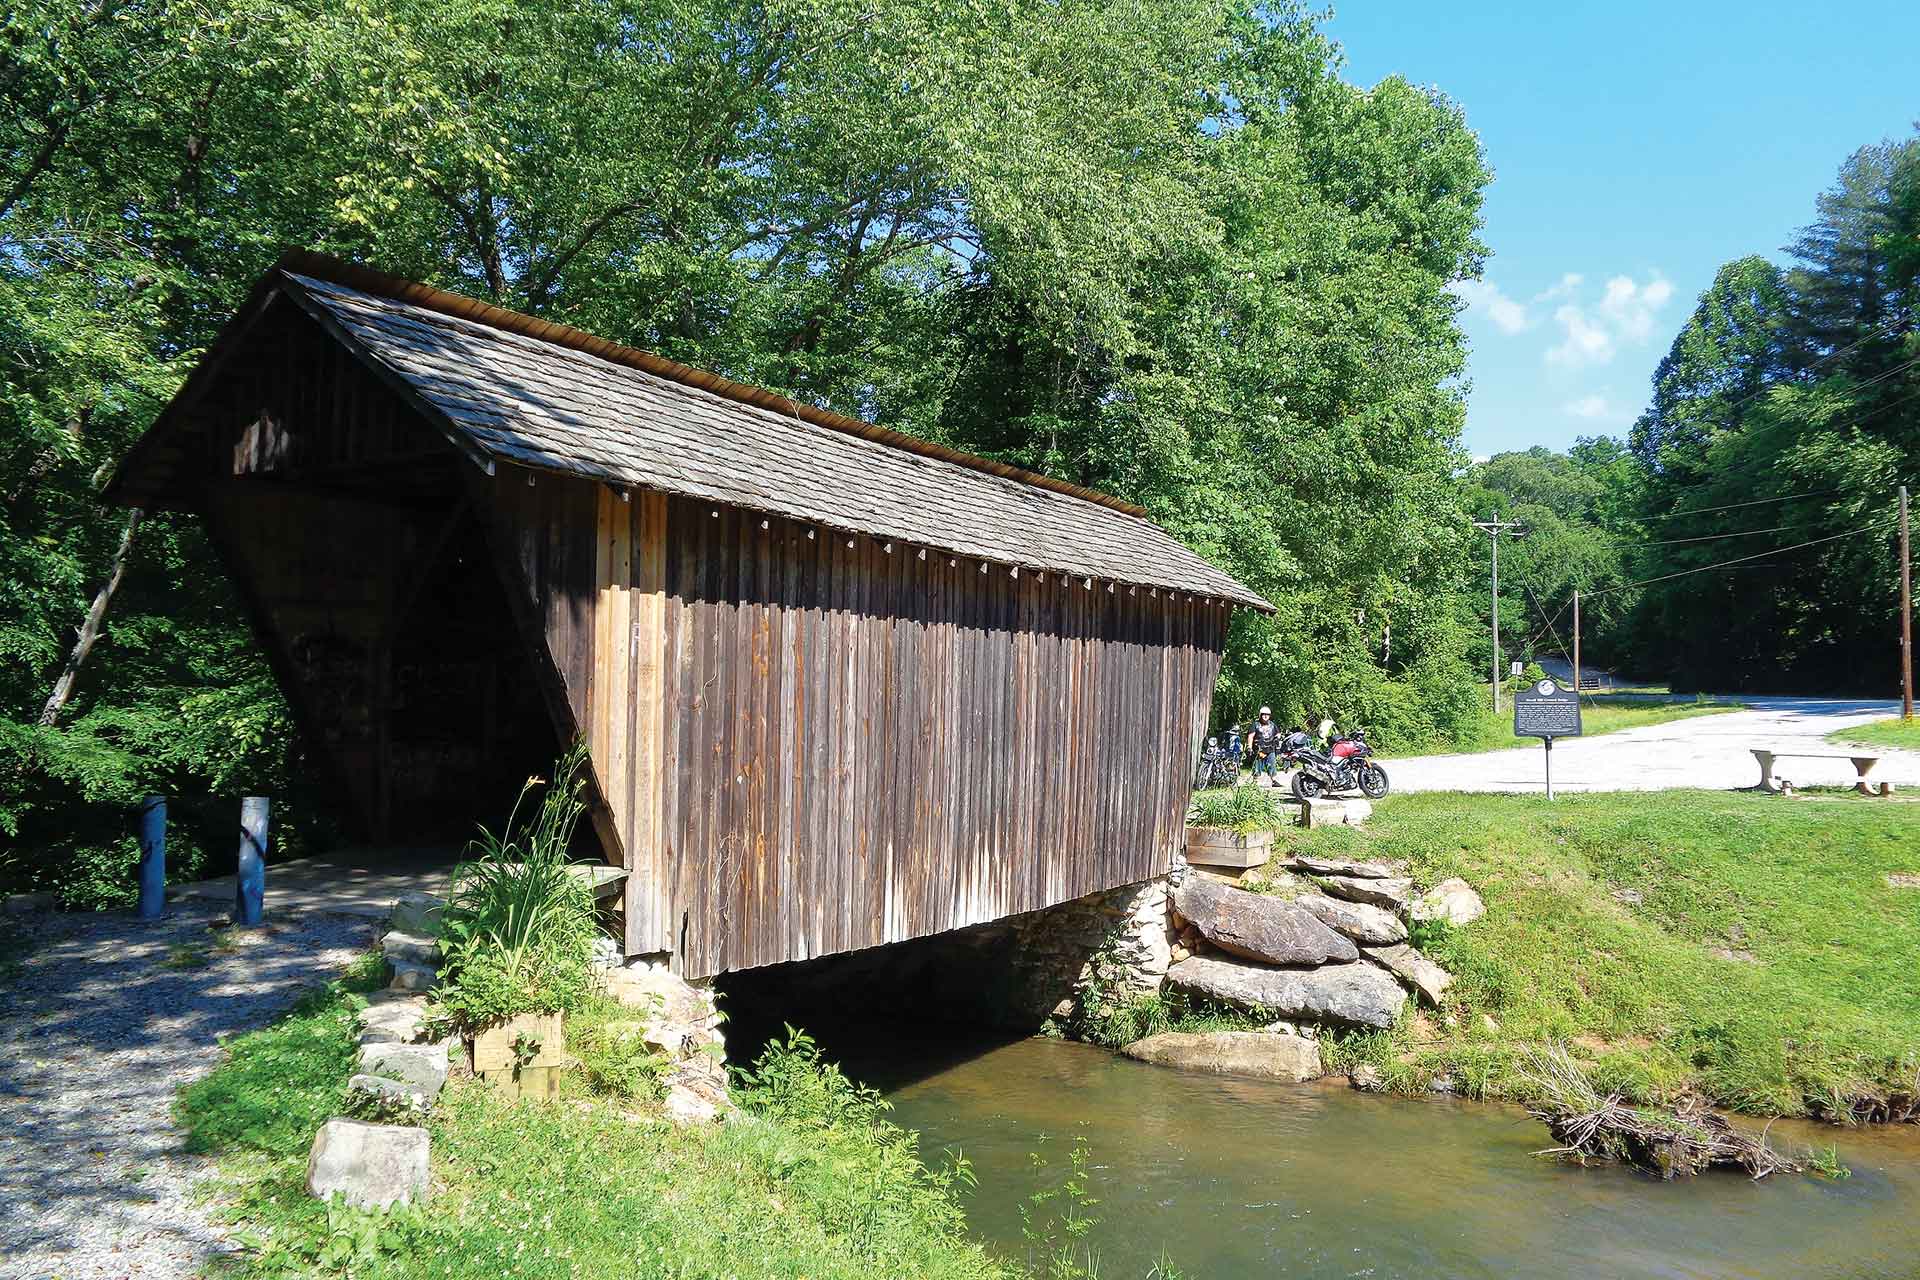 Motorcyclists take a break at a covered bridge.